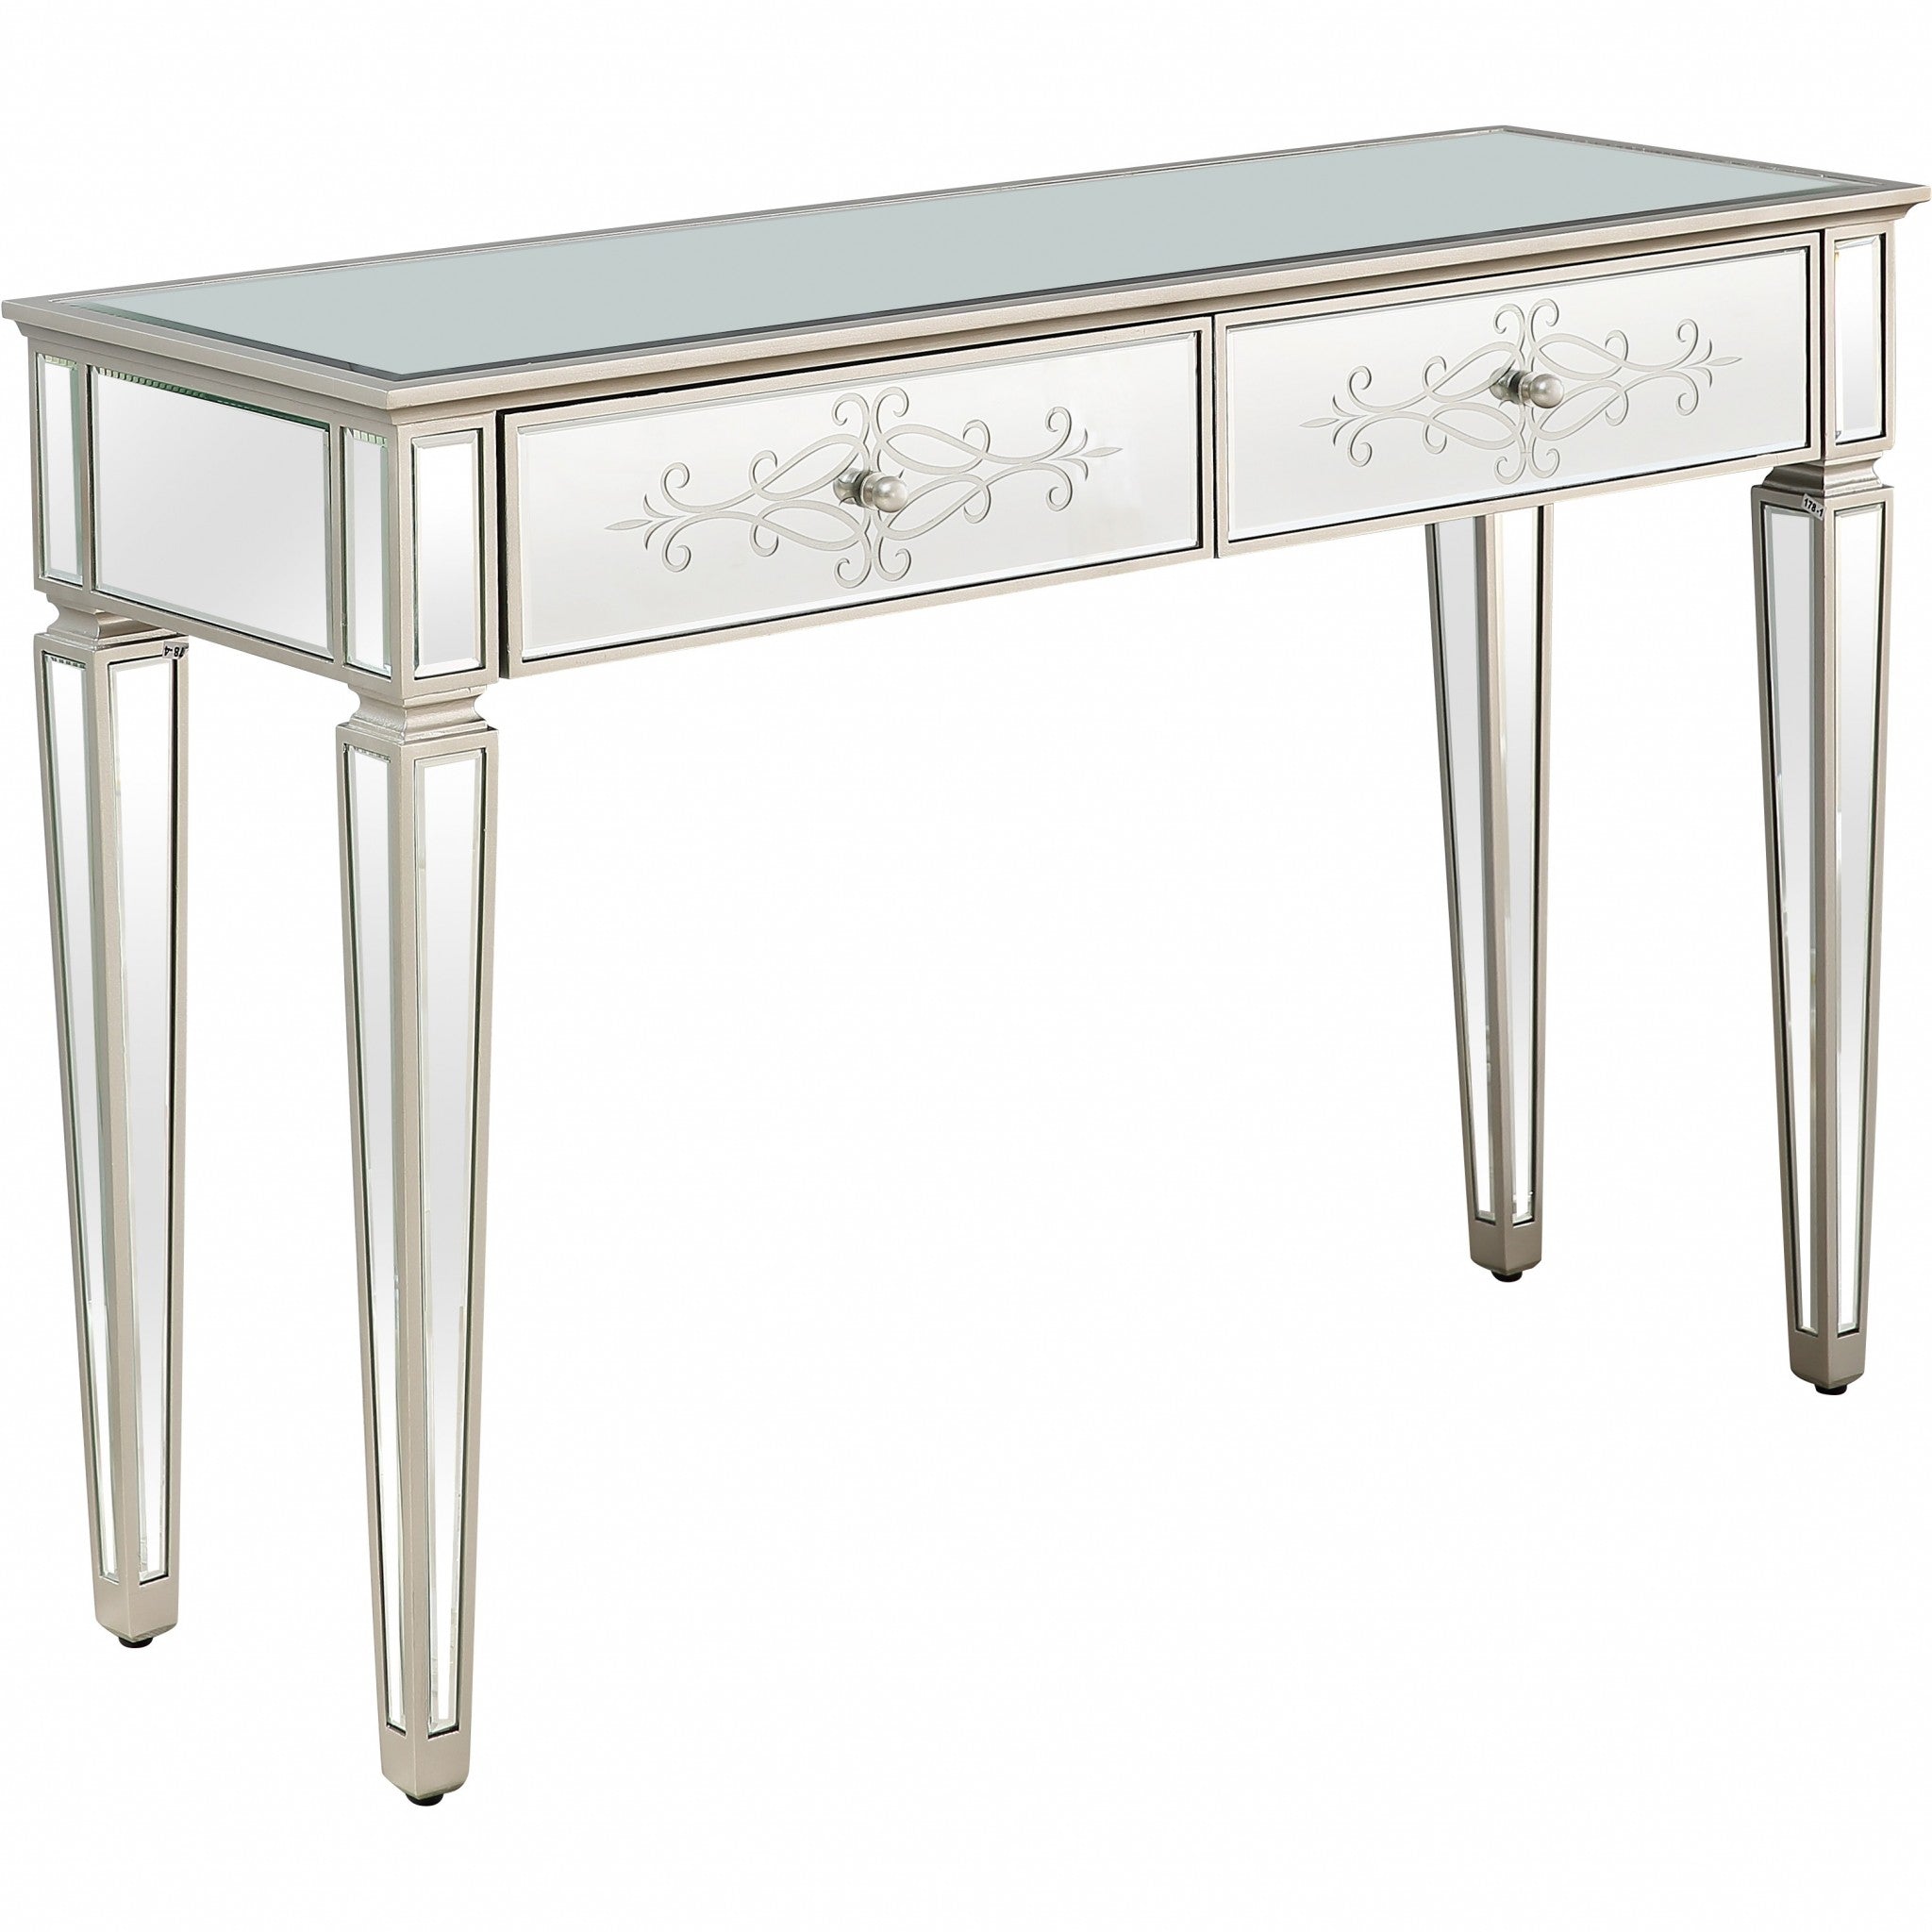 Antiqued Etch Console Table